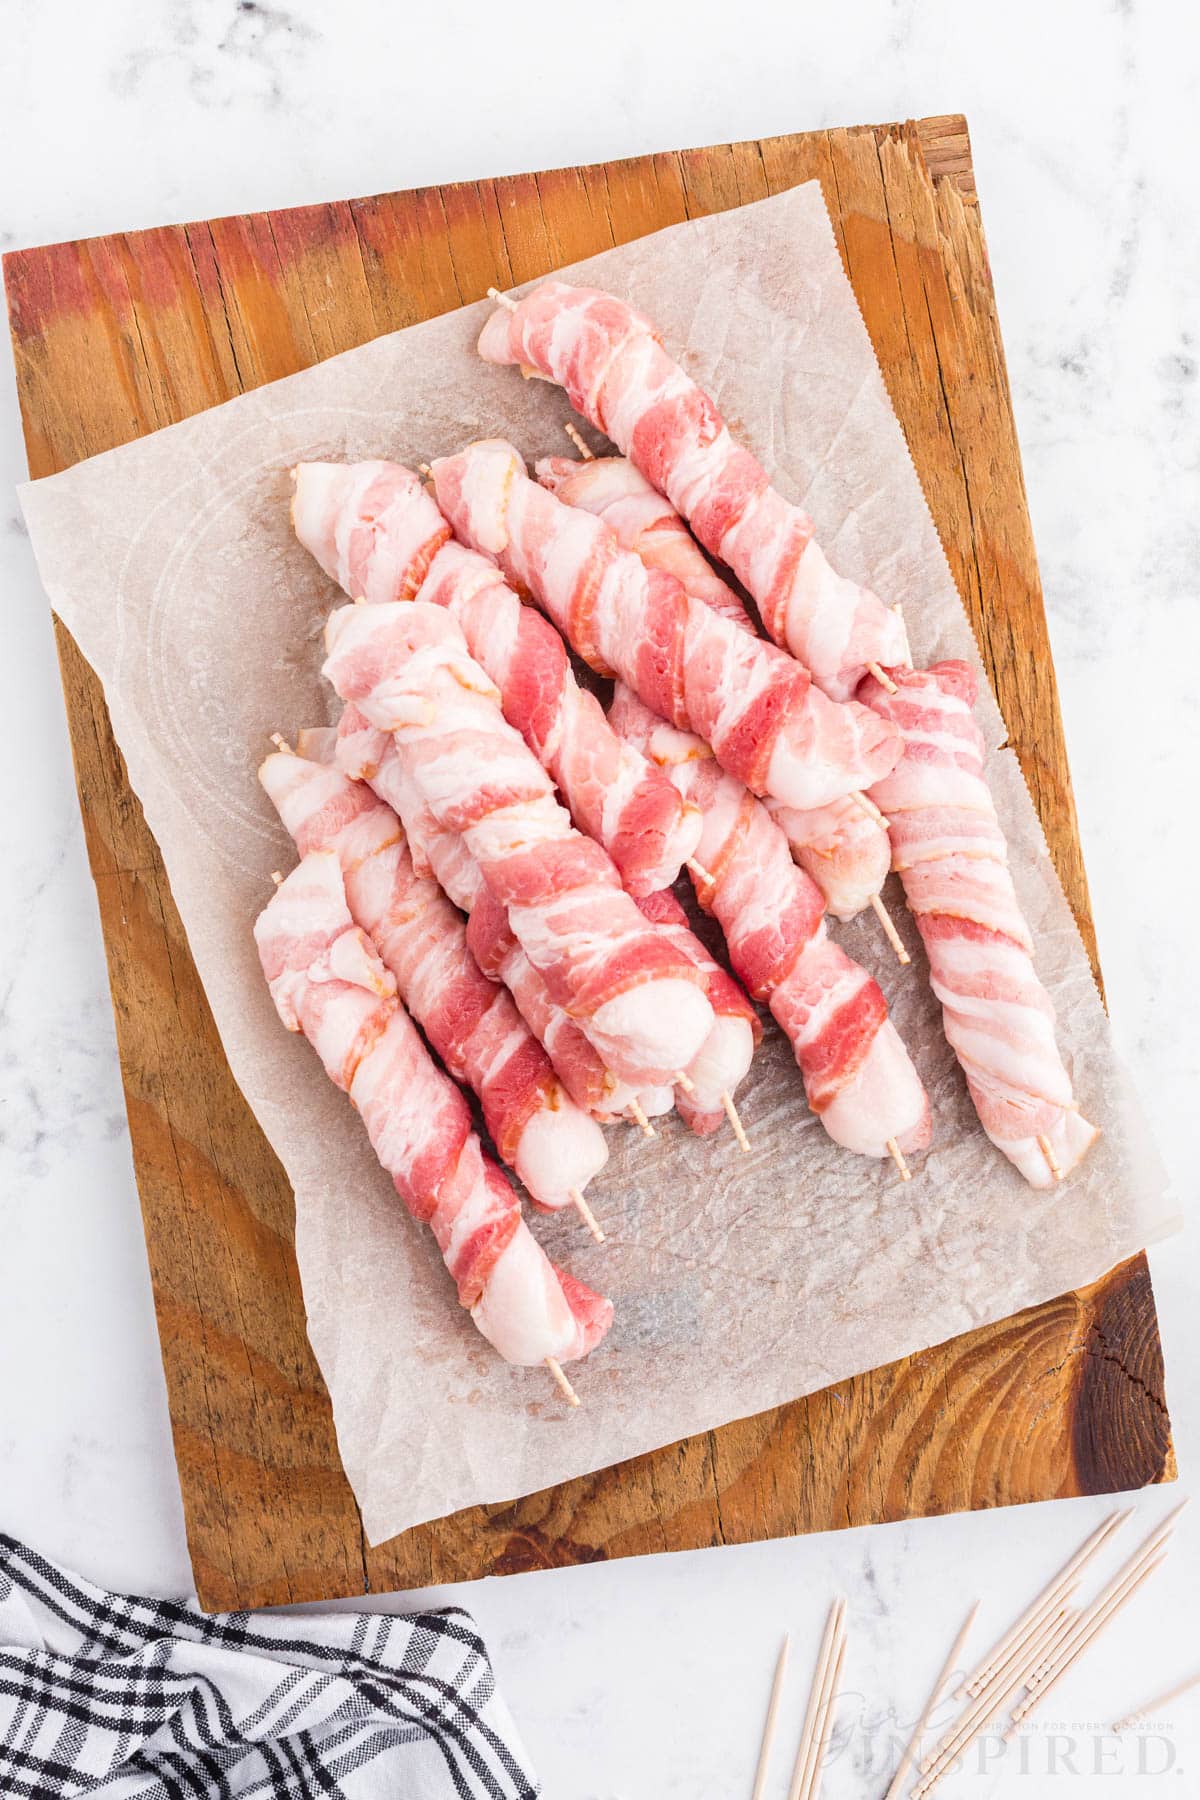 Bacon wrapped Mozzarella cheese sticks on parchment paper on a wooden kitchen board, navy checkered linen, toothpicks on a marble countertop.